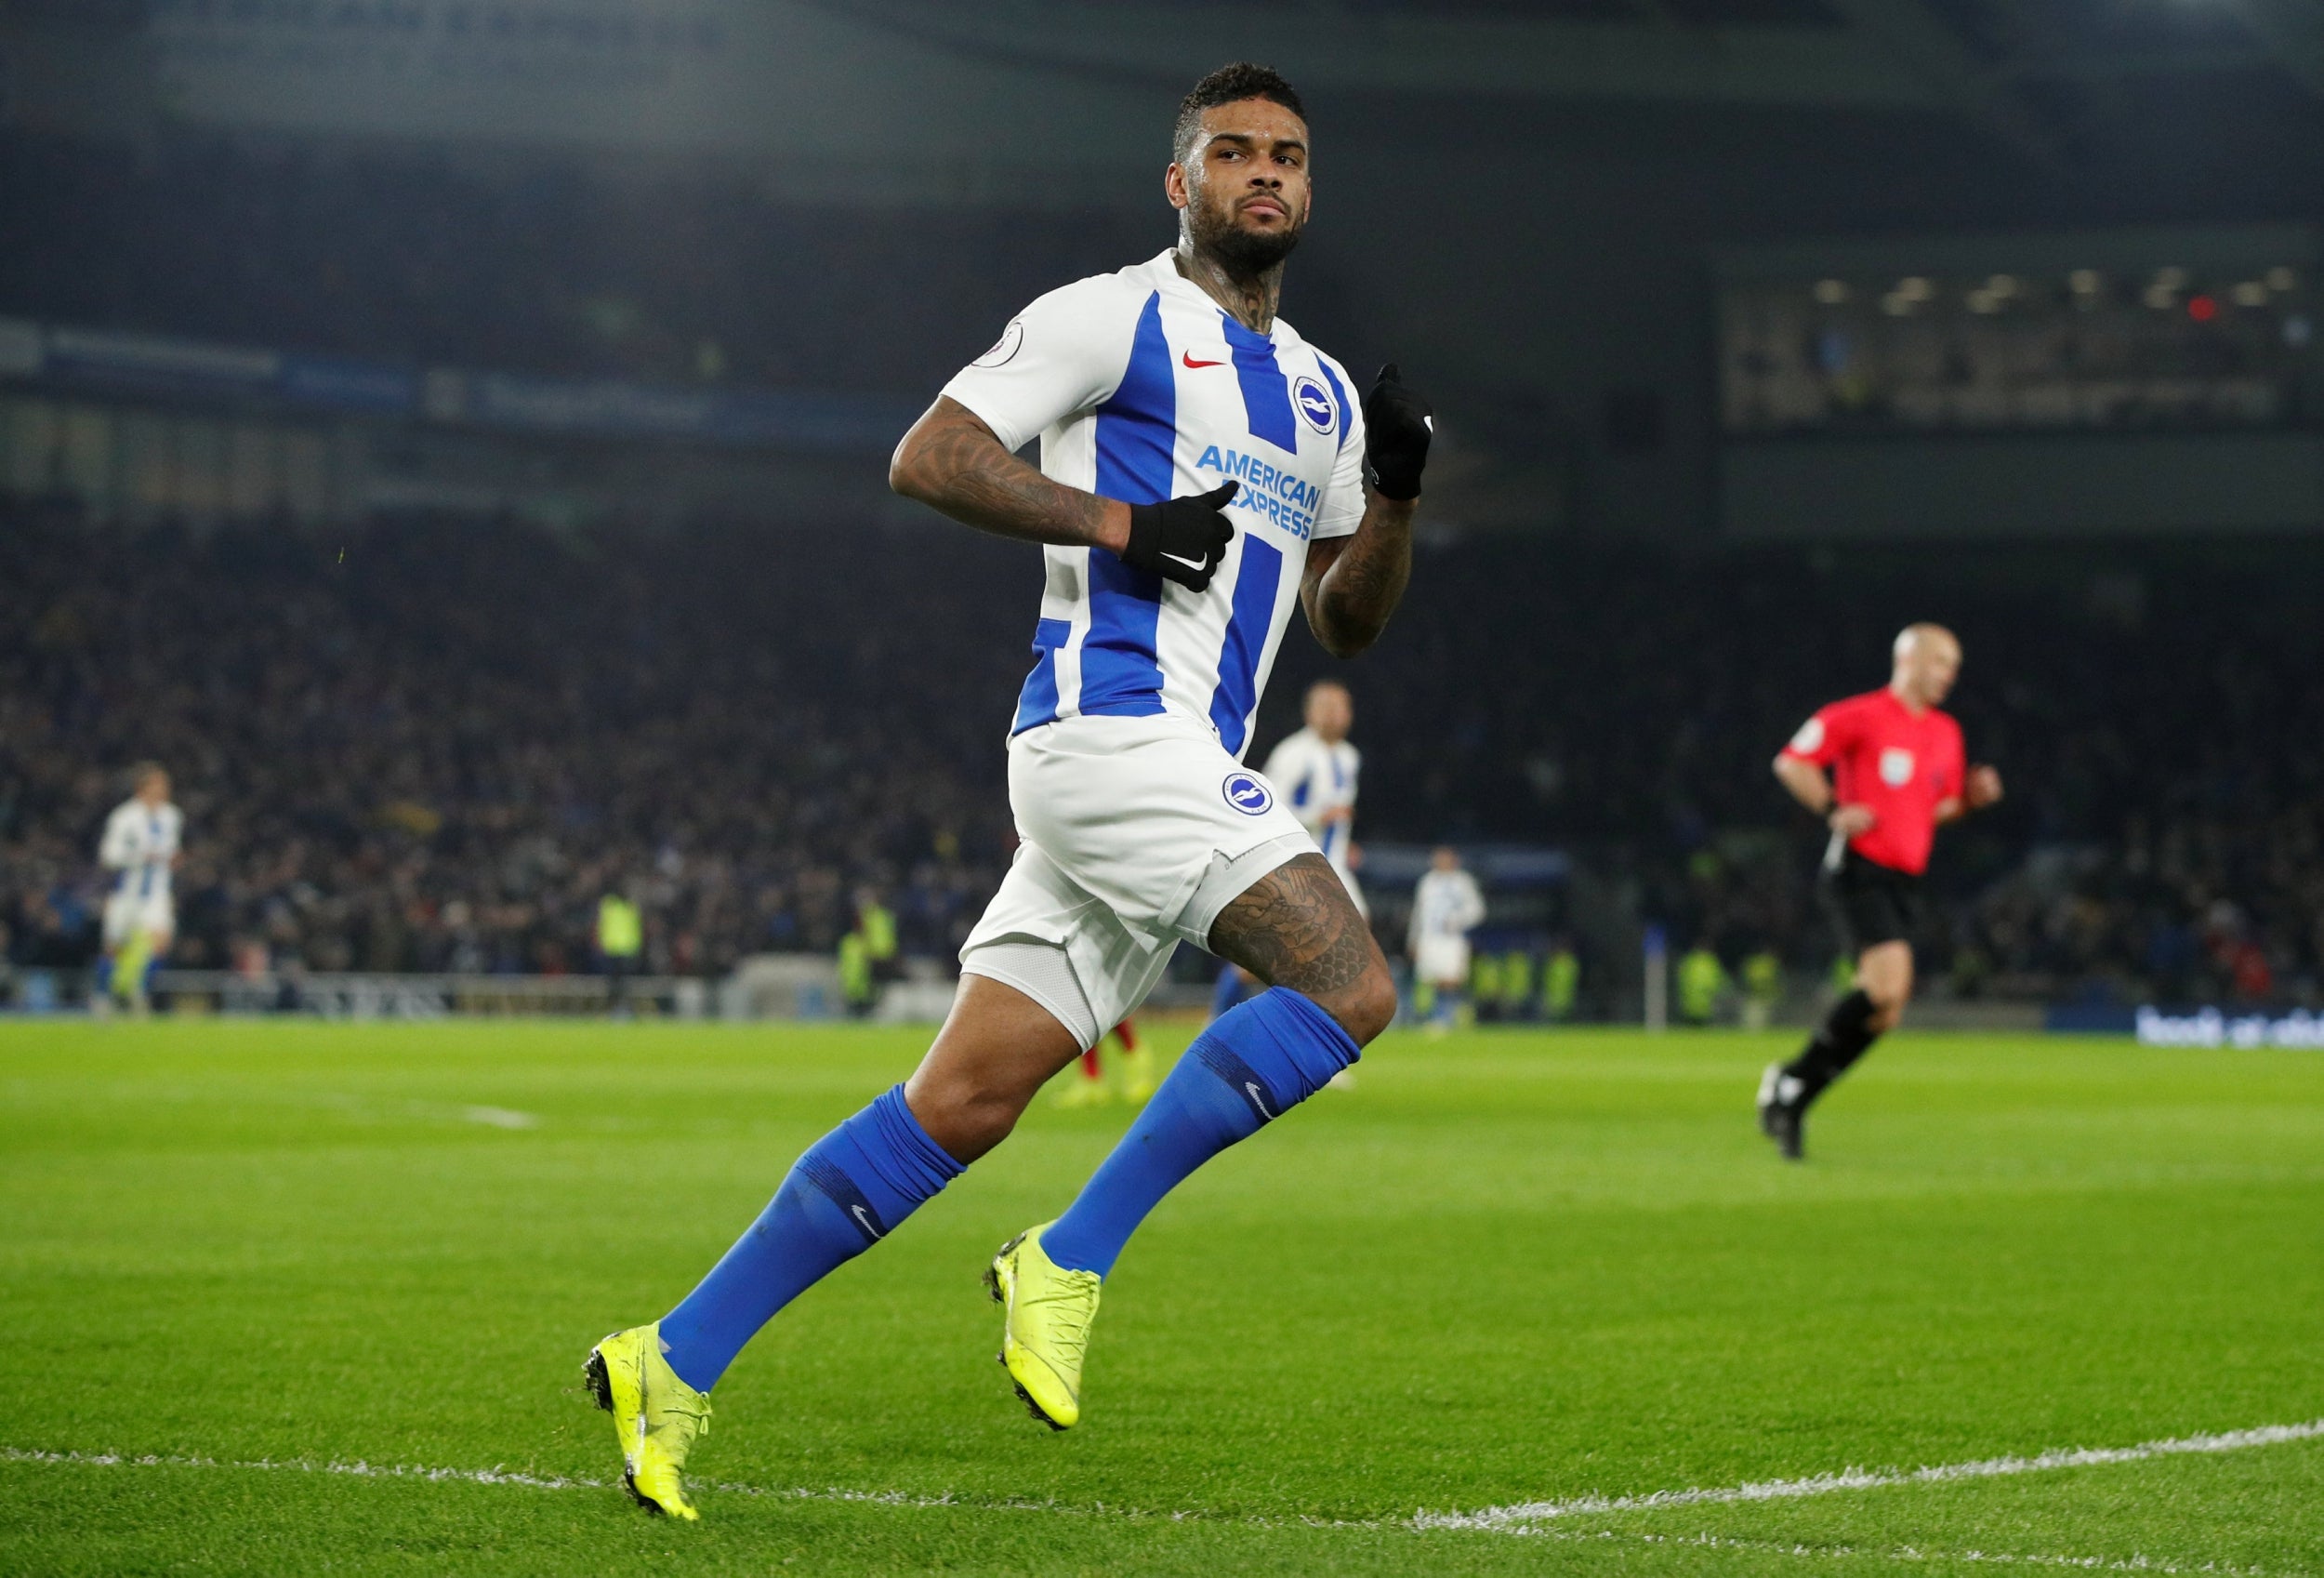 Locadia equalised in the first-half